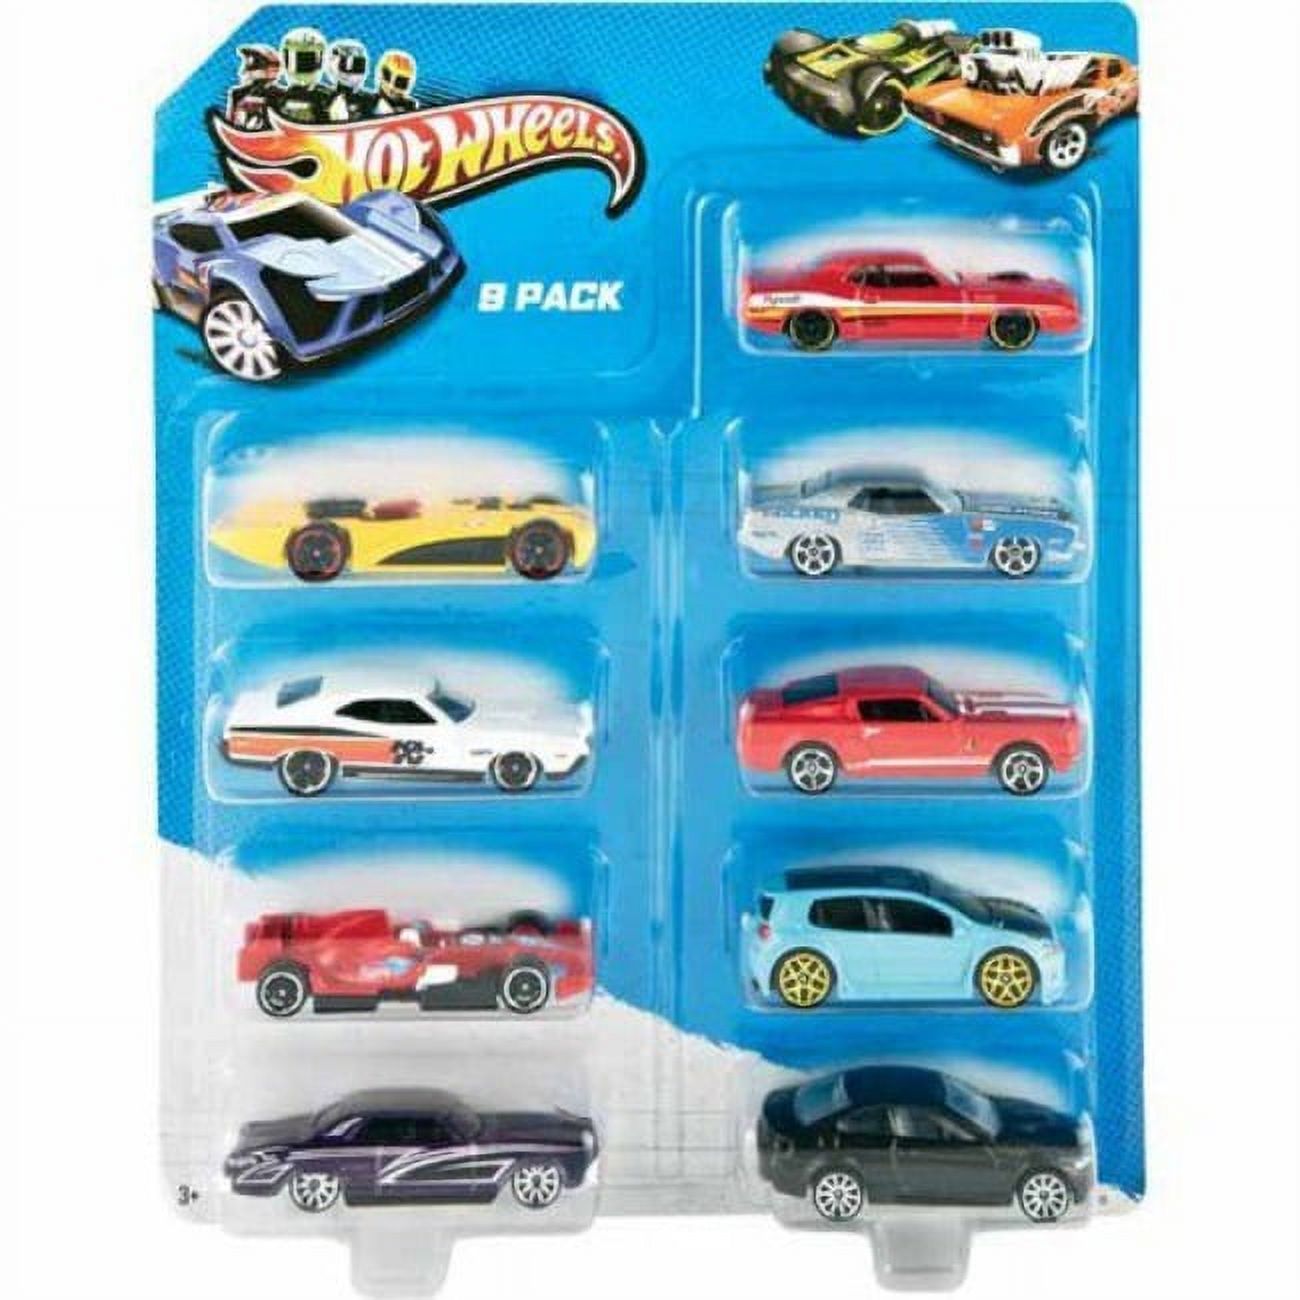 Hot Wheels 9 Pack - image 1 of 3